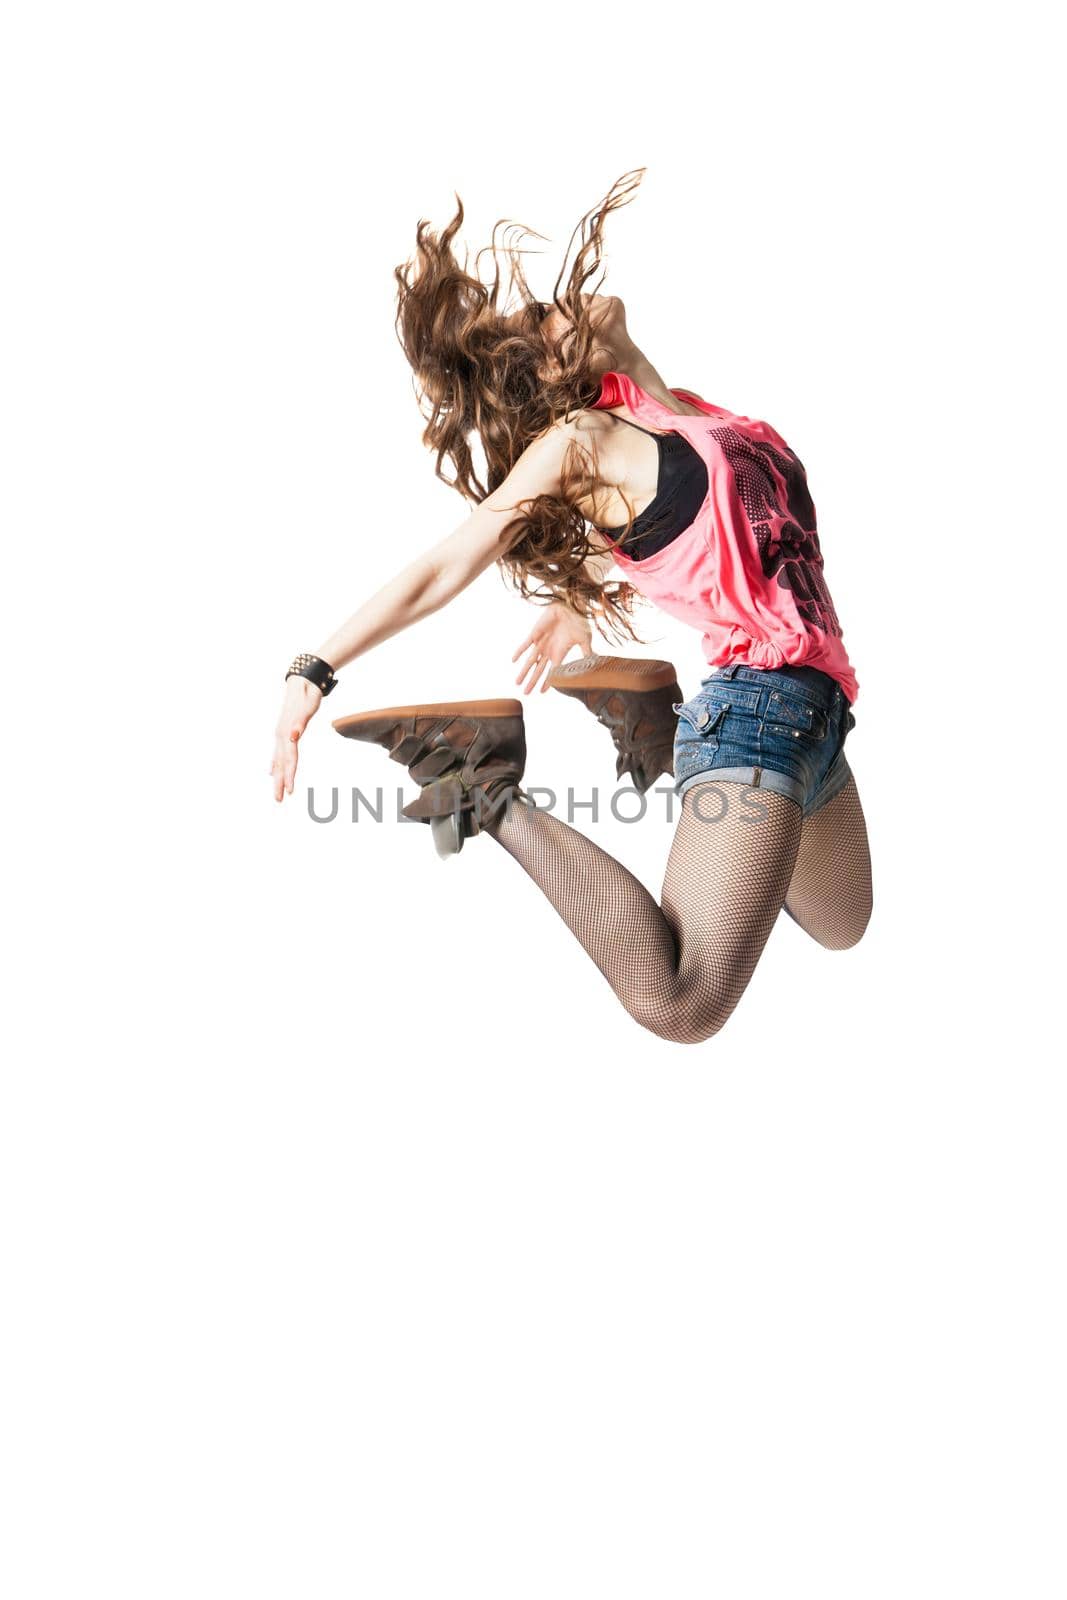 cool looking two dancing woman isolated on white background